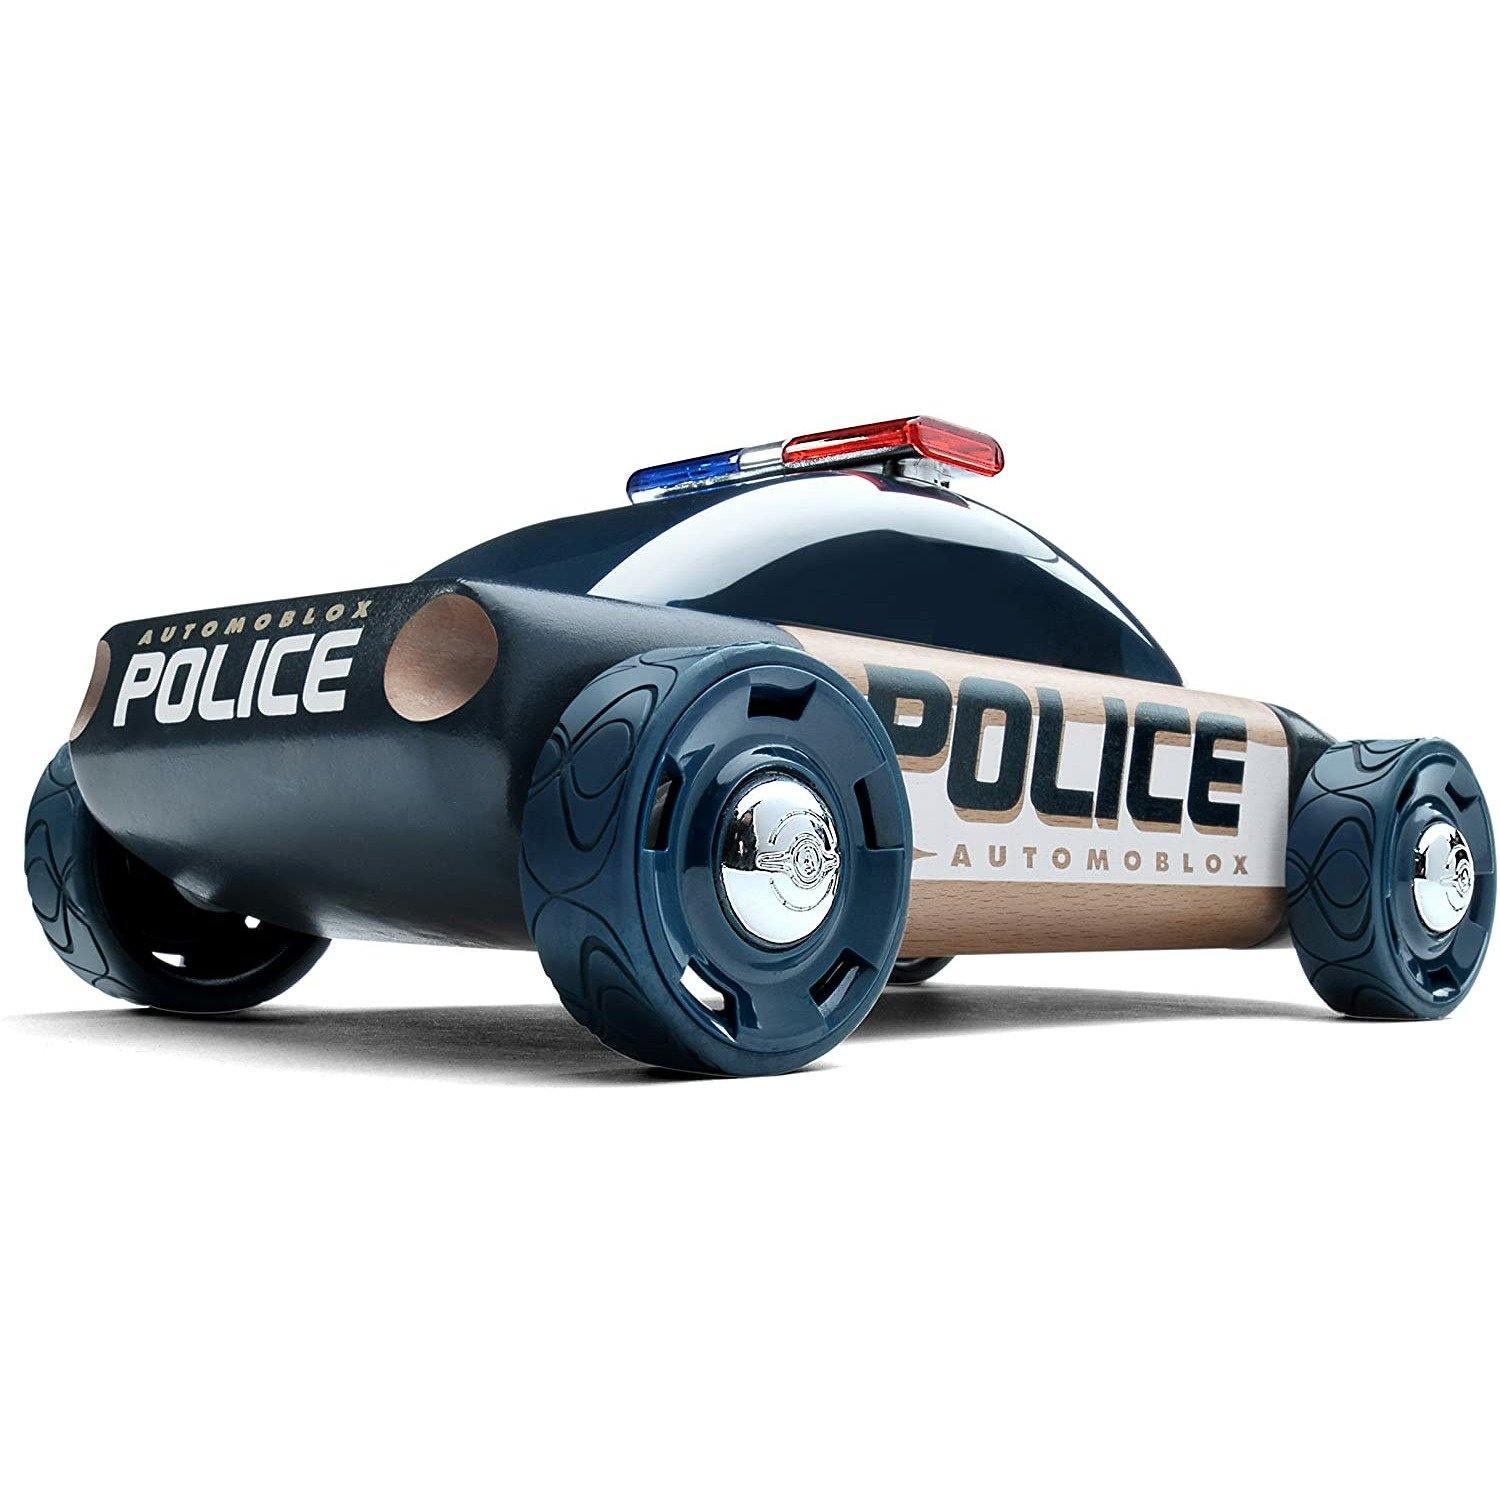 S9 Police Cruiser/ X9 Fire SUV/ T900 Rescue Truck 3 Pack Automoblox Minis - BumbleToys - 5-7 Years, Boys, OXE, Vehicles & Play Sets